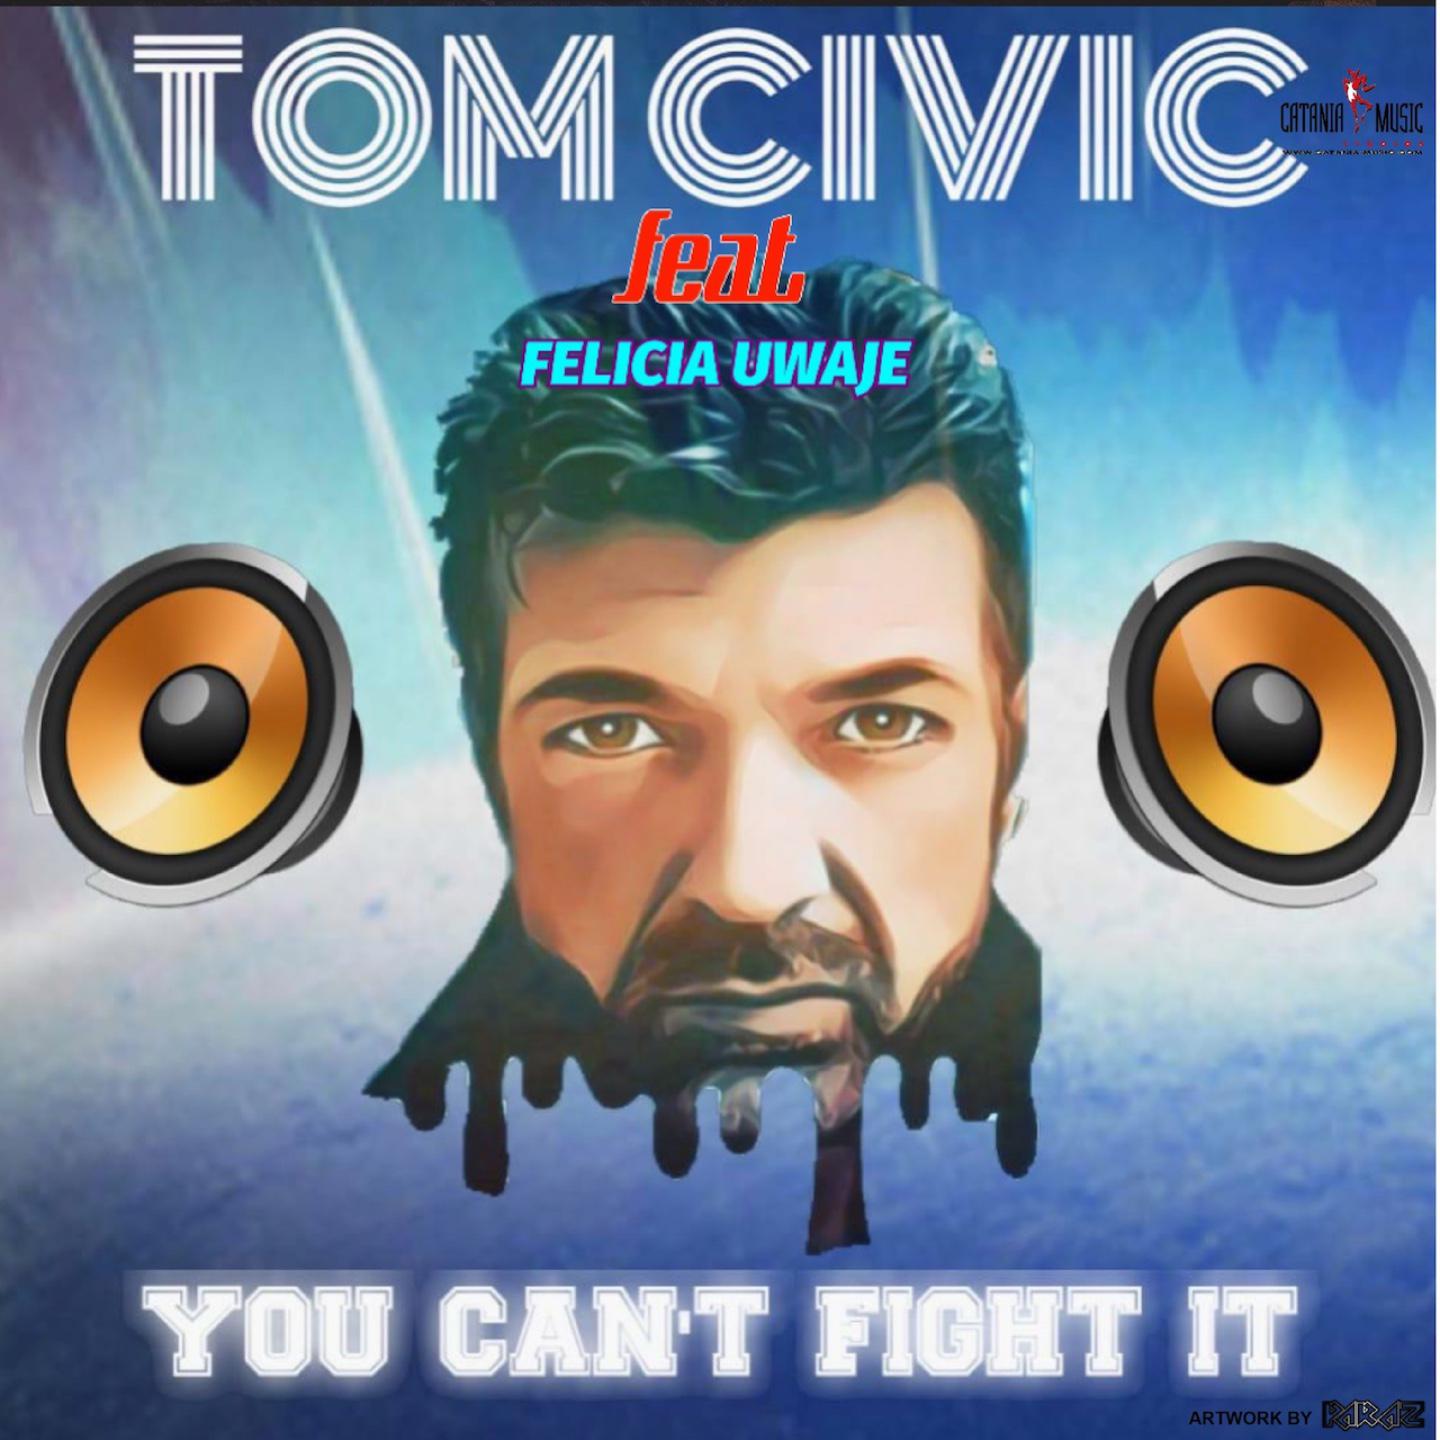 Tom Civic - You Can't Fight It